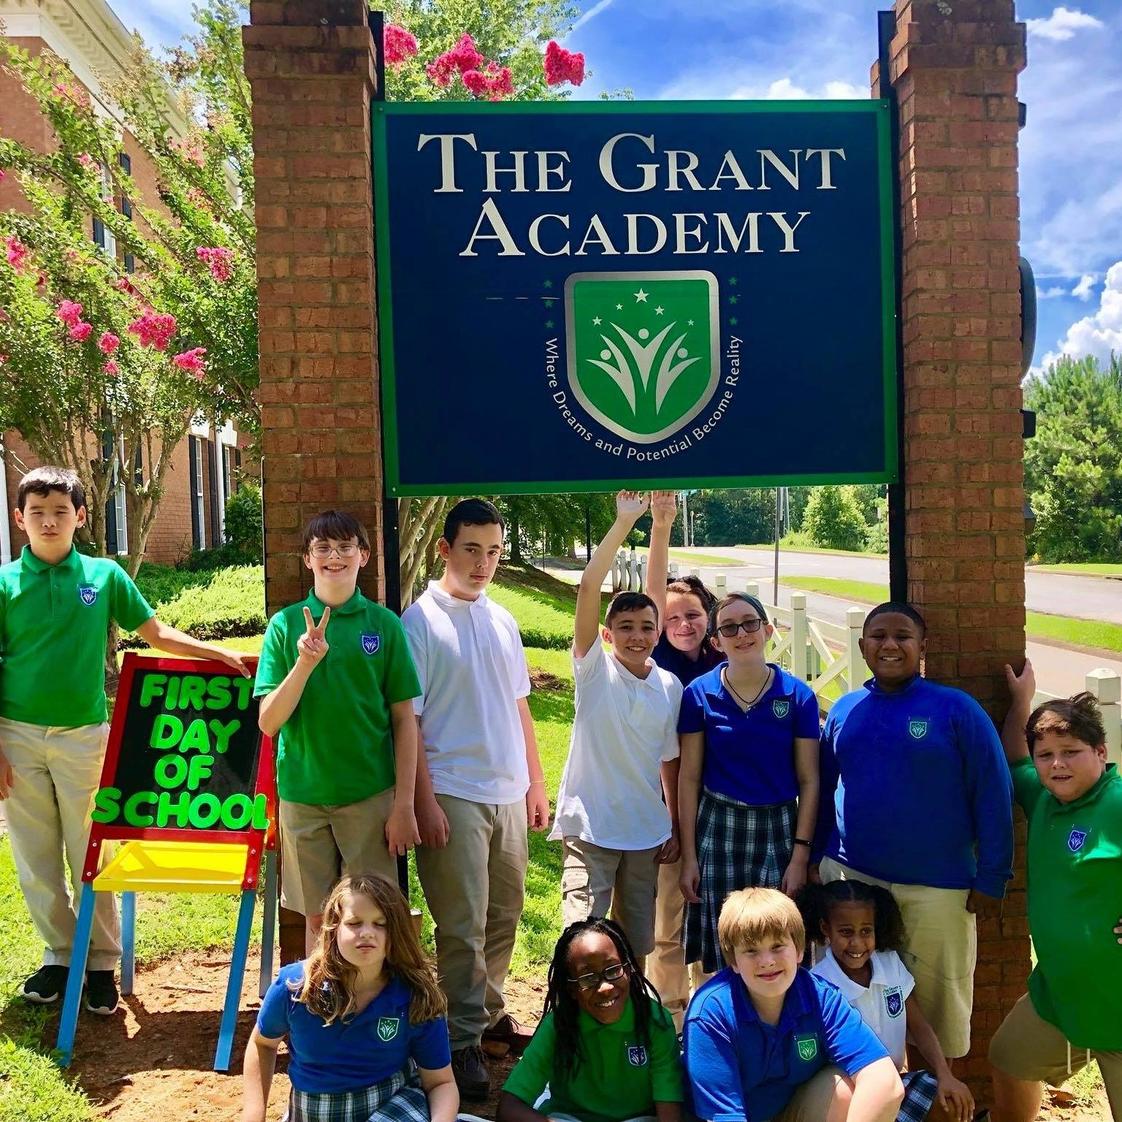 The Grant Academy Photo #1 - We are so blessed to have such a great group of students at The Grant Academy.